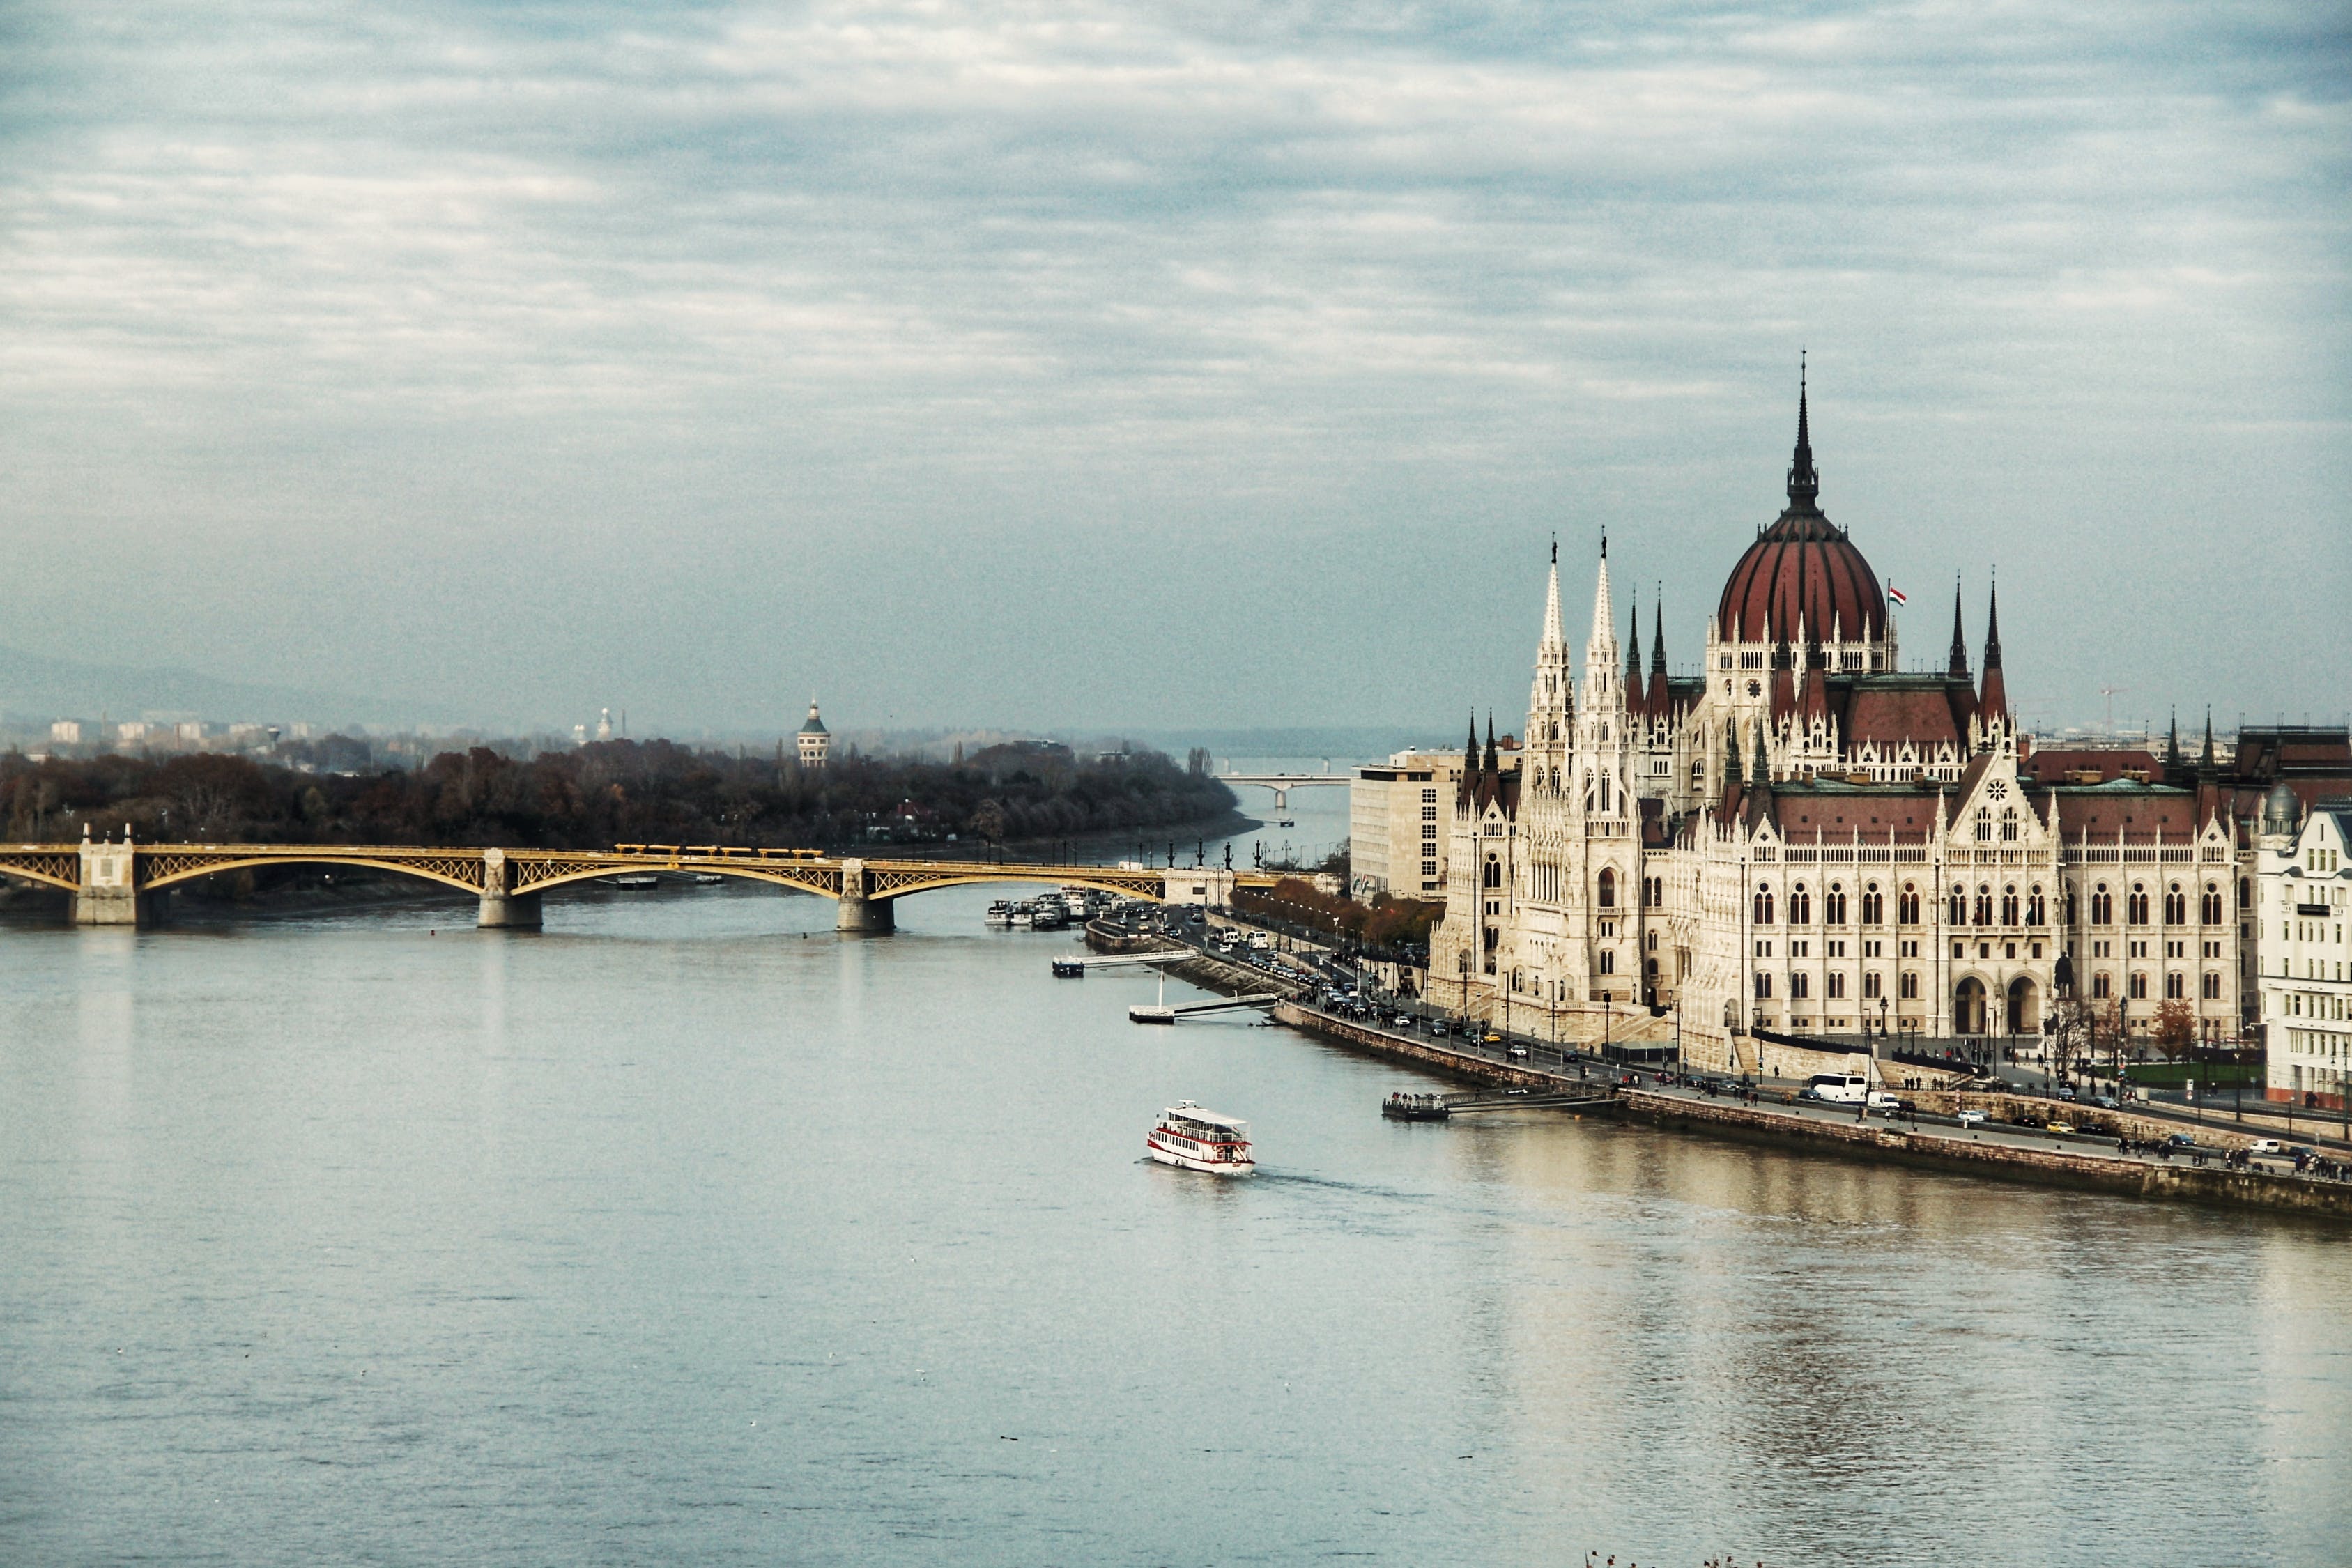 New Video Promoting Budapest In 'Spice Of Europe' International Campaign